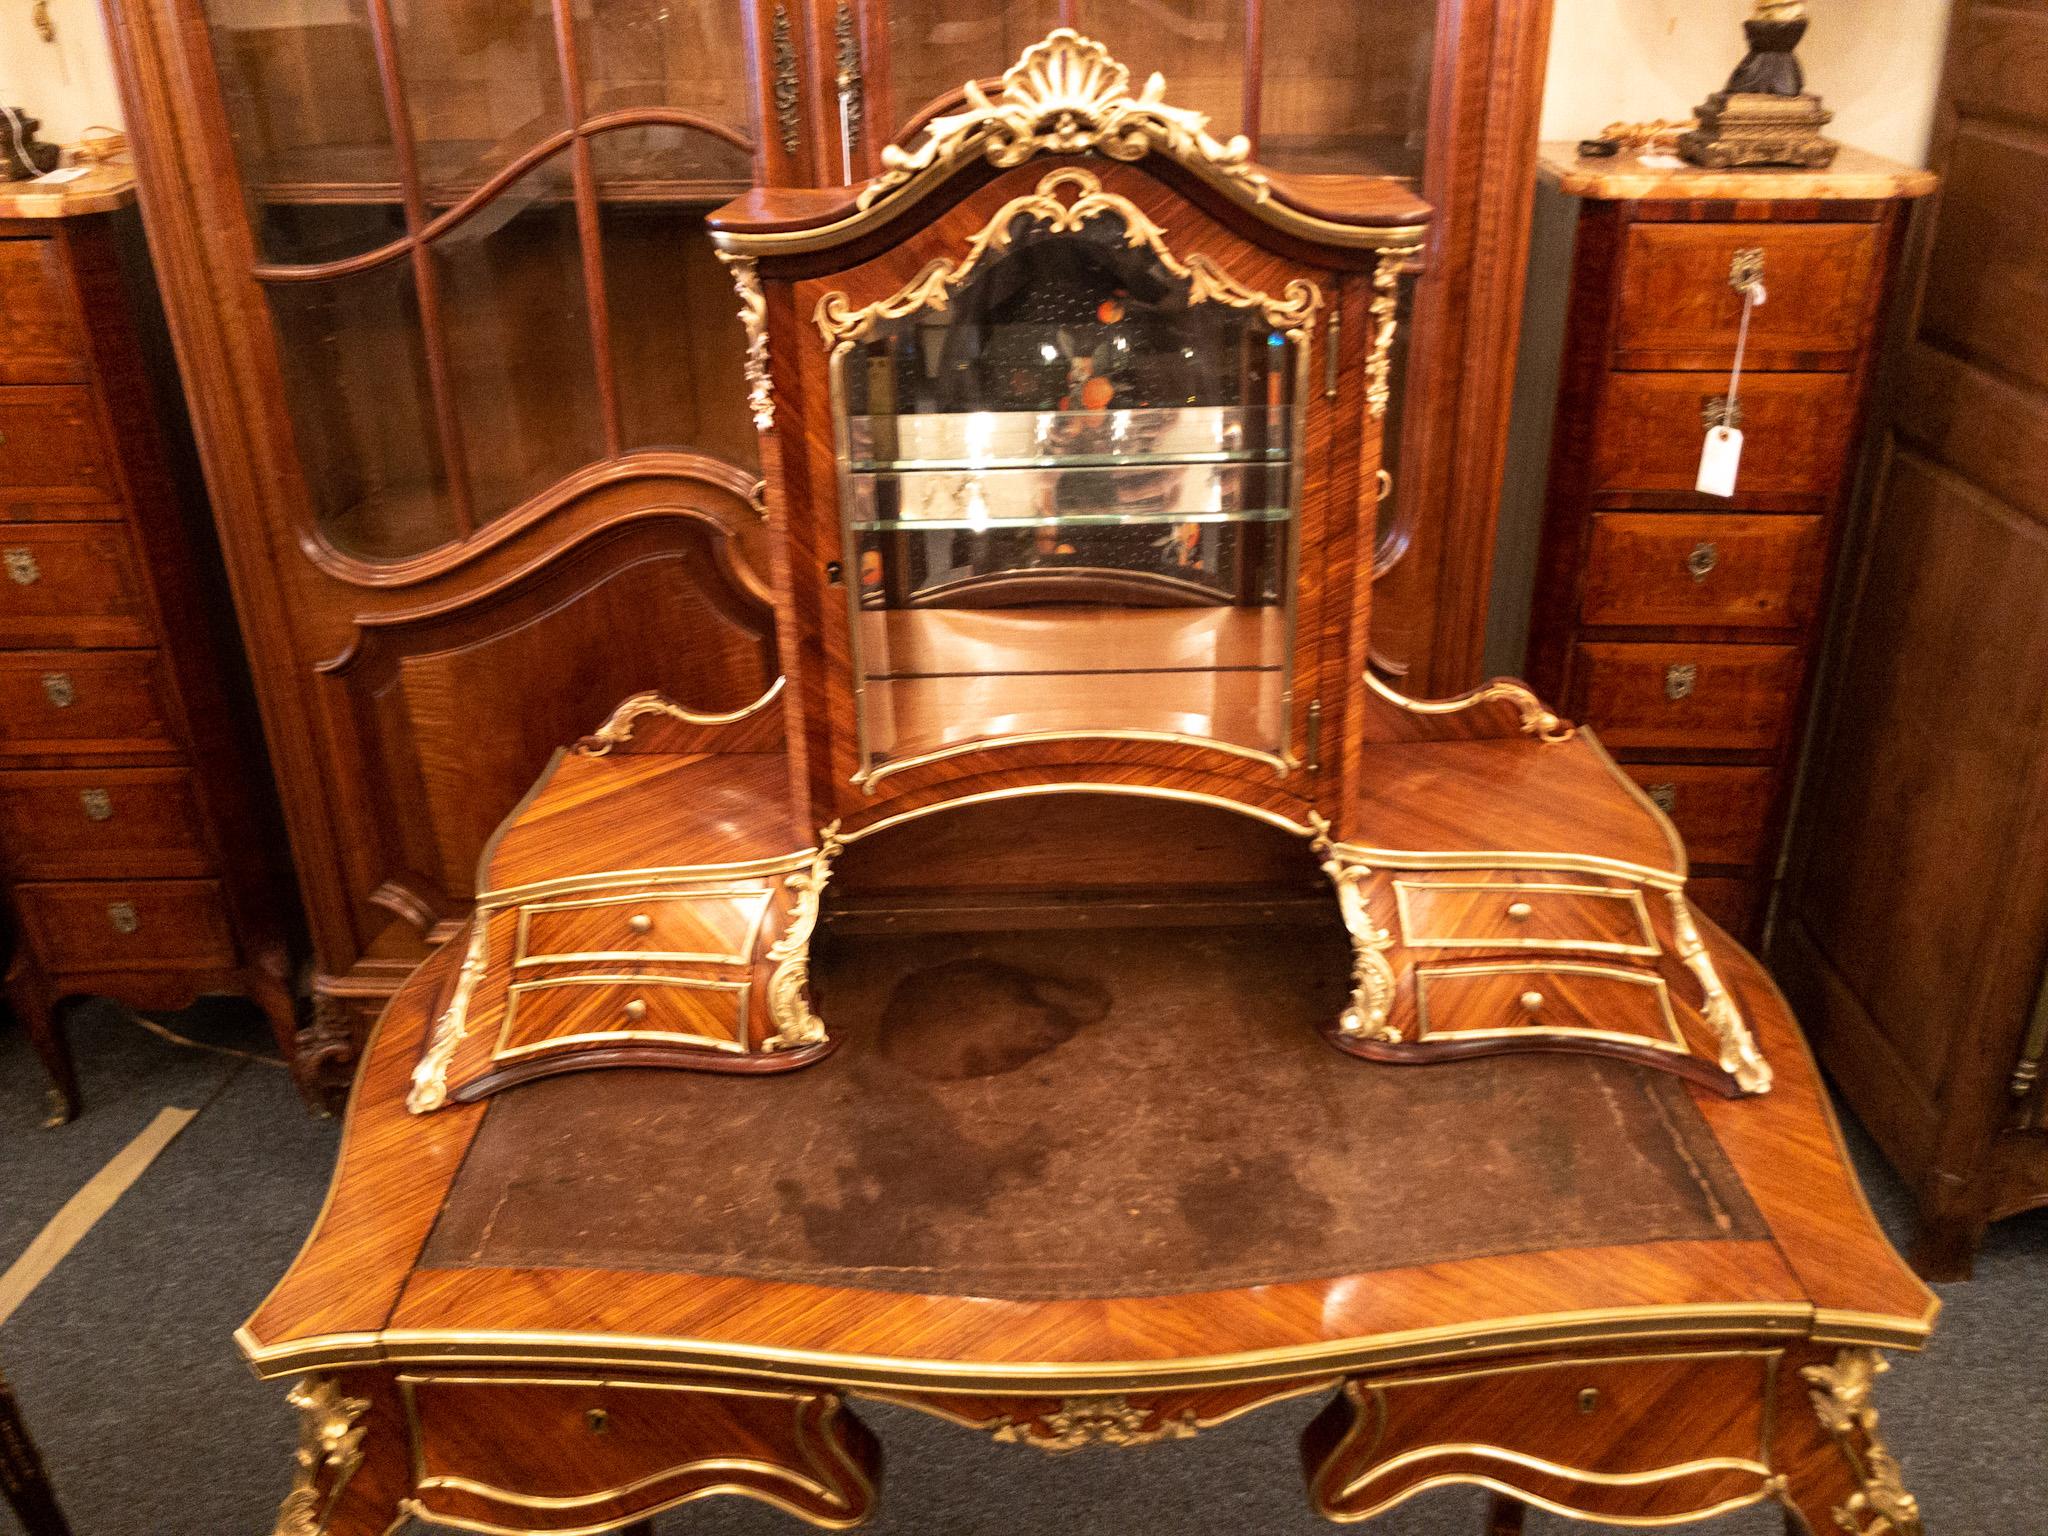 Antique French rosewood and gold bronze writing desk, circa 1880-1890.